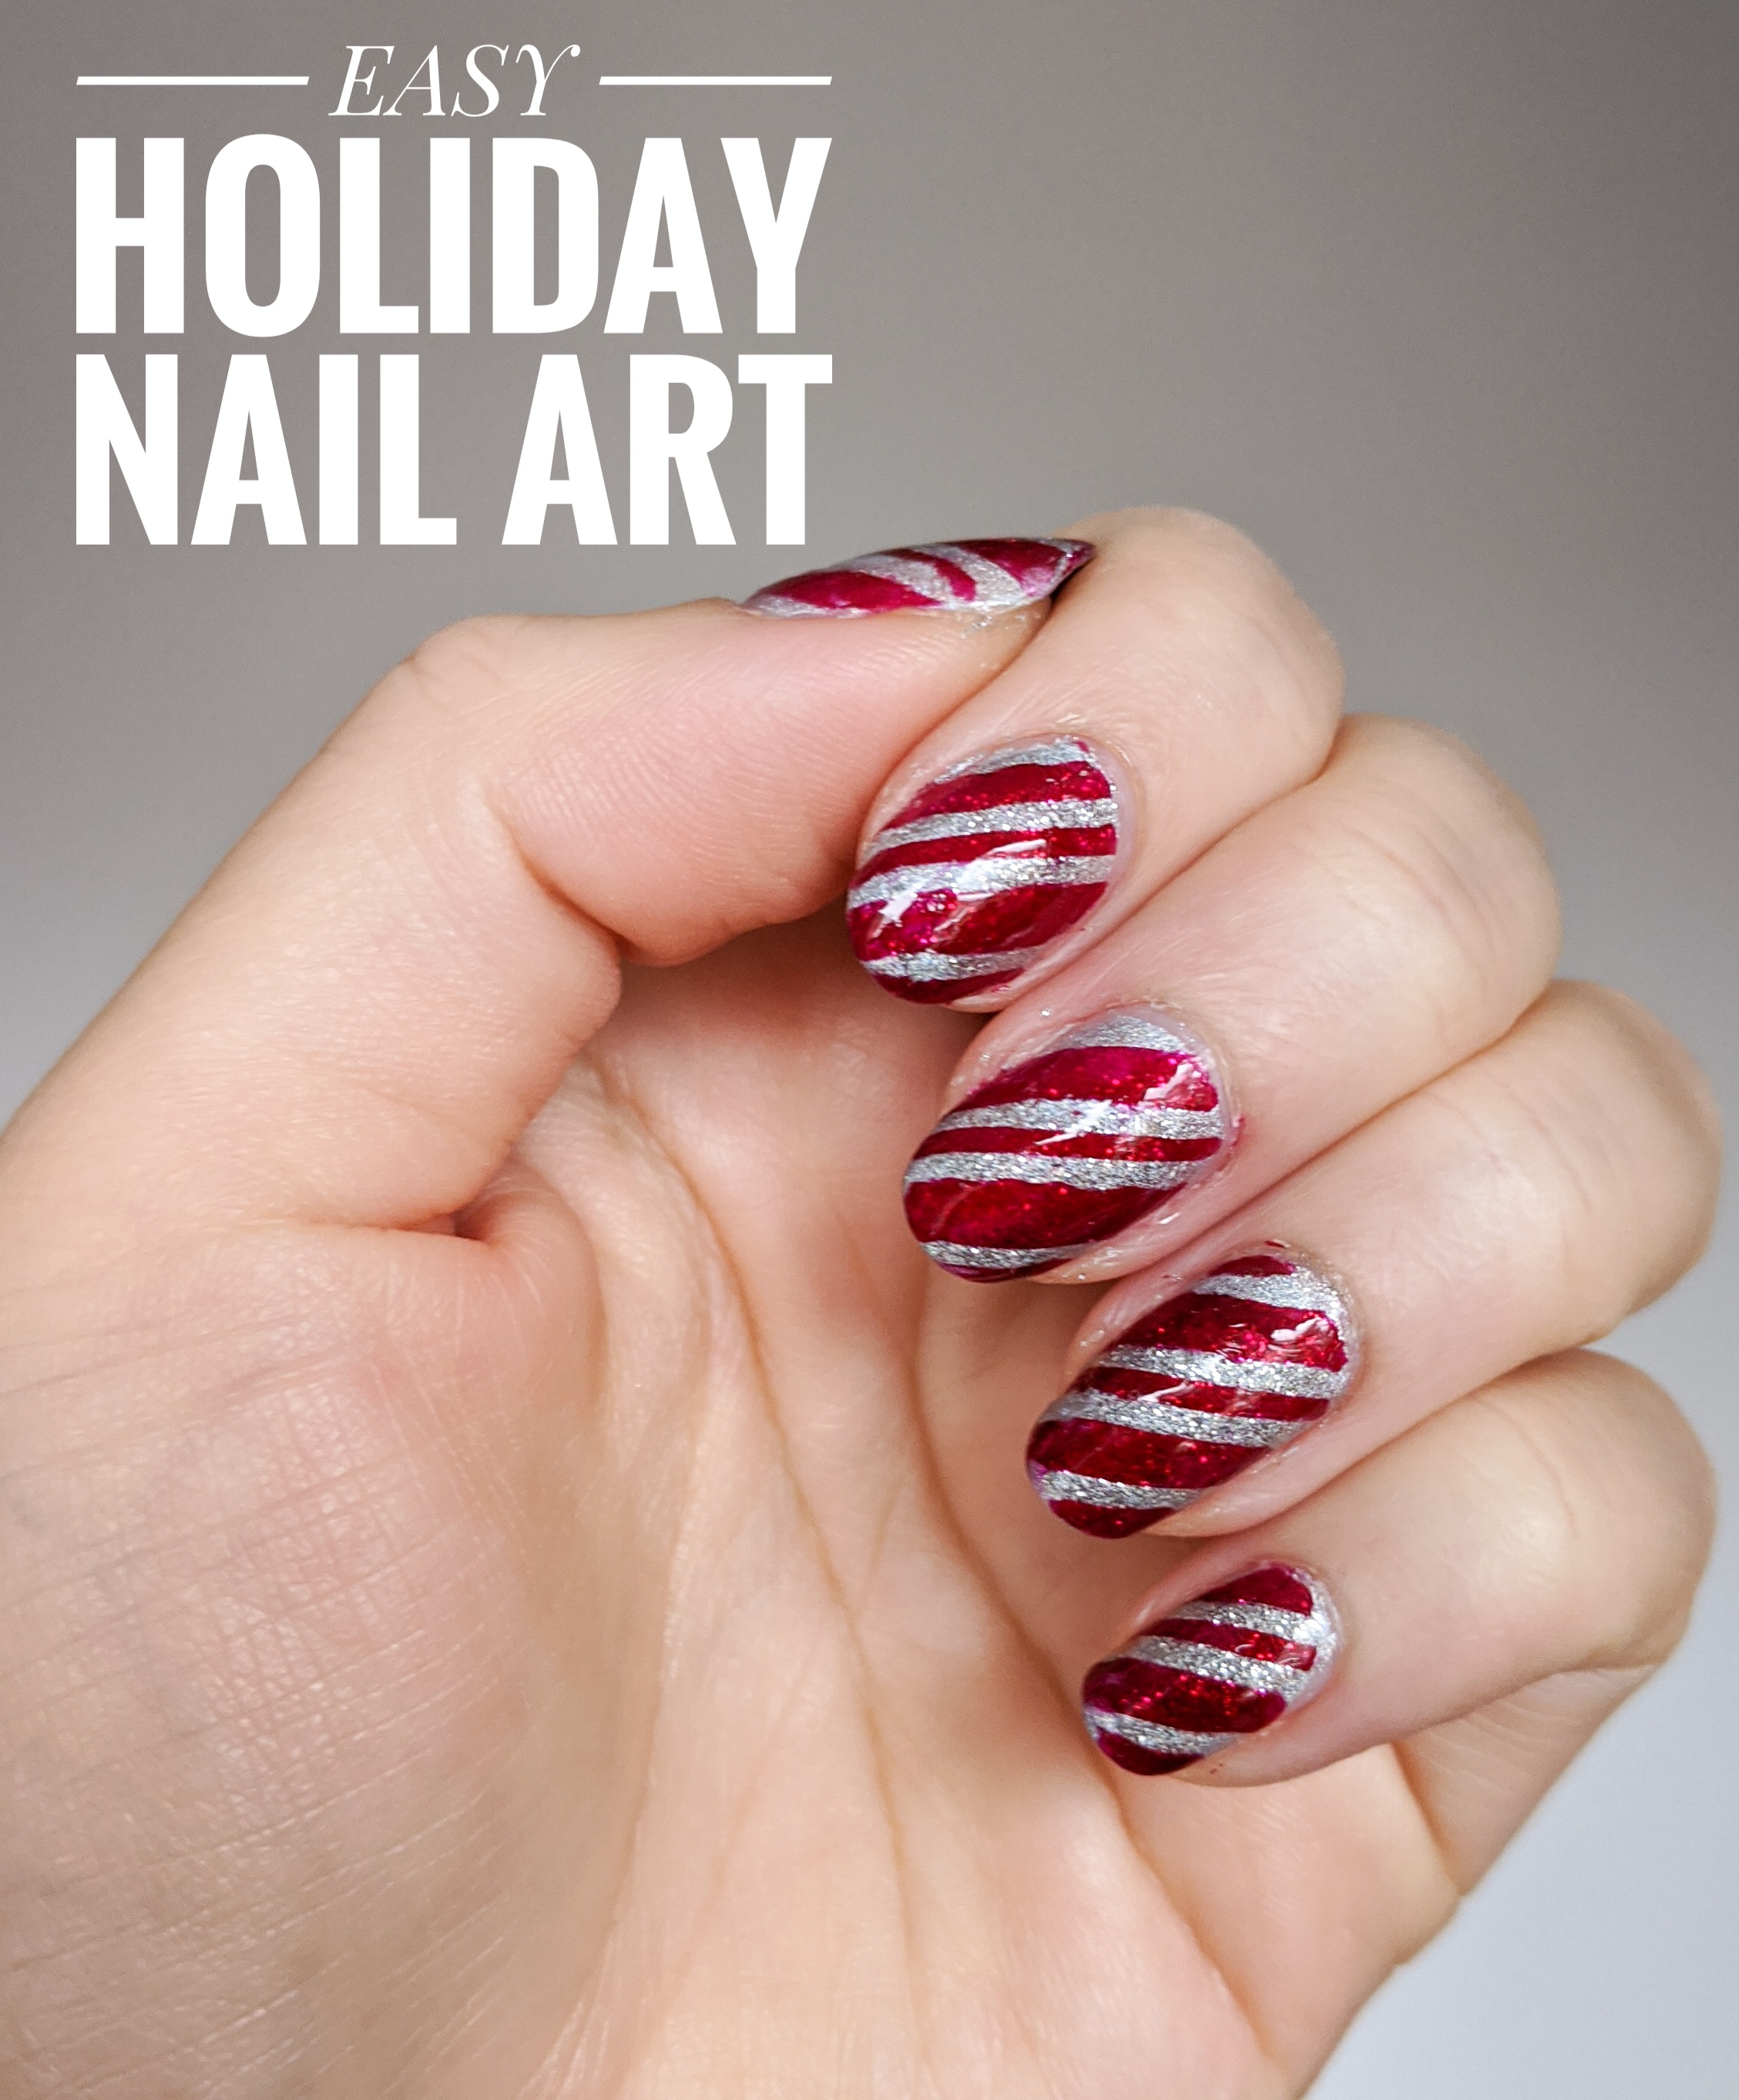 6 Christmas Nail Designs That You Can Do at Home